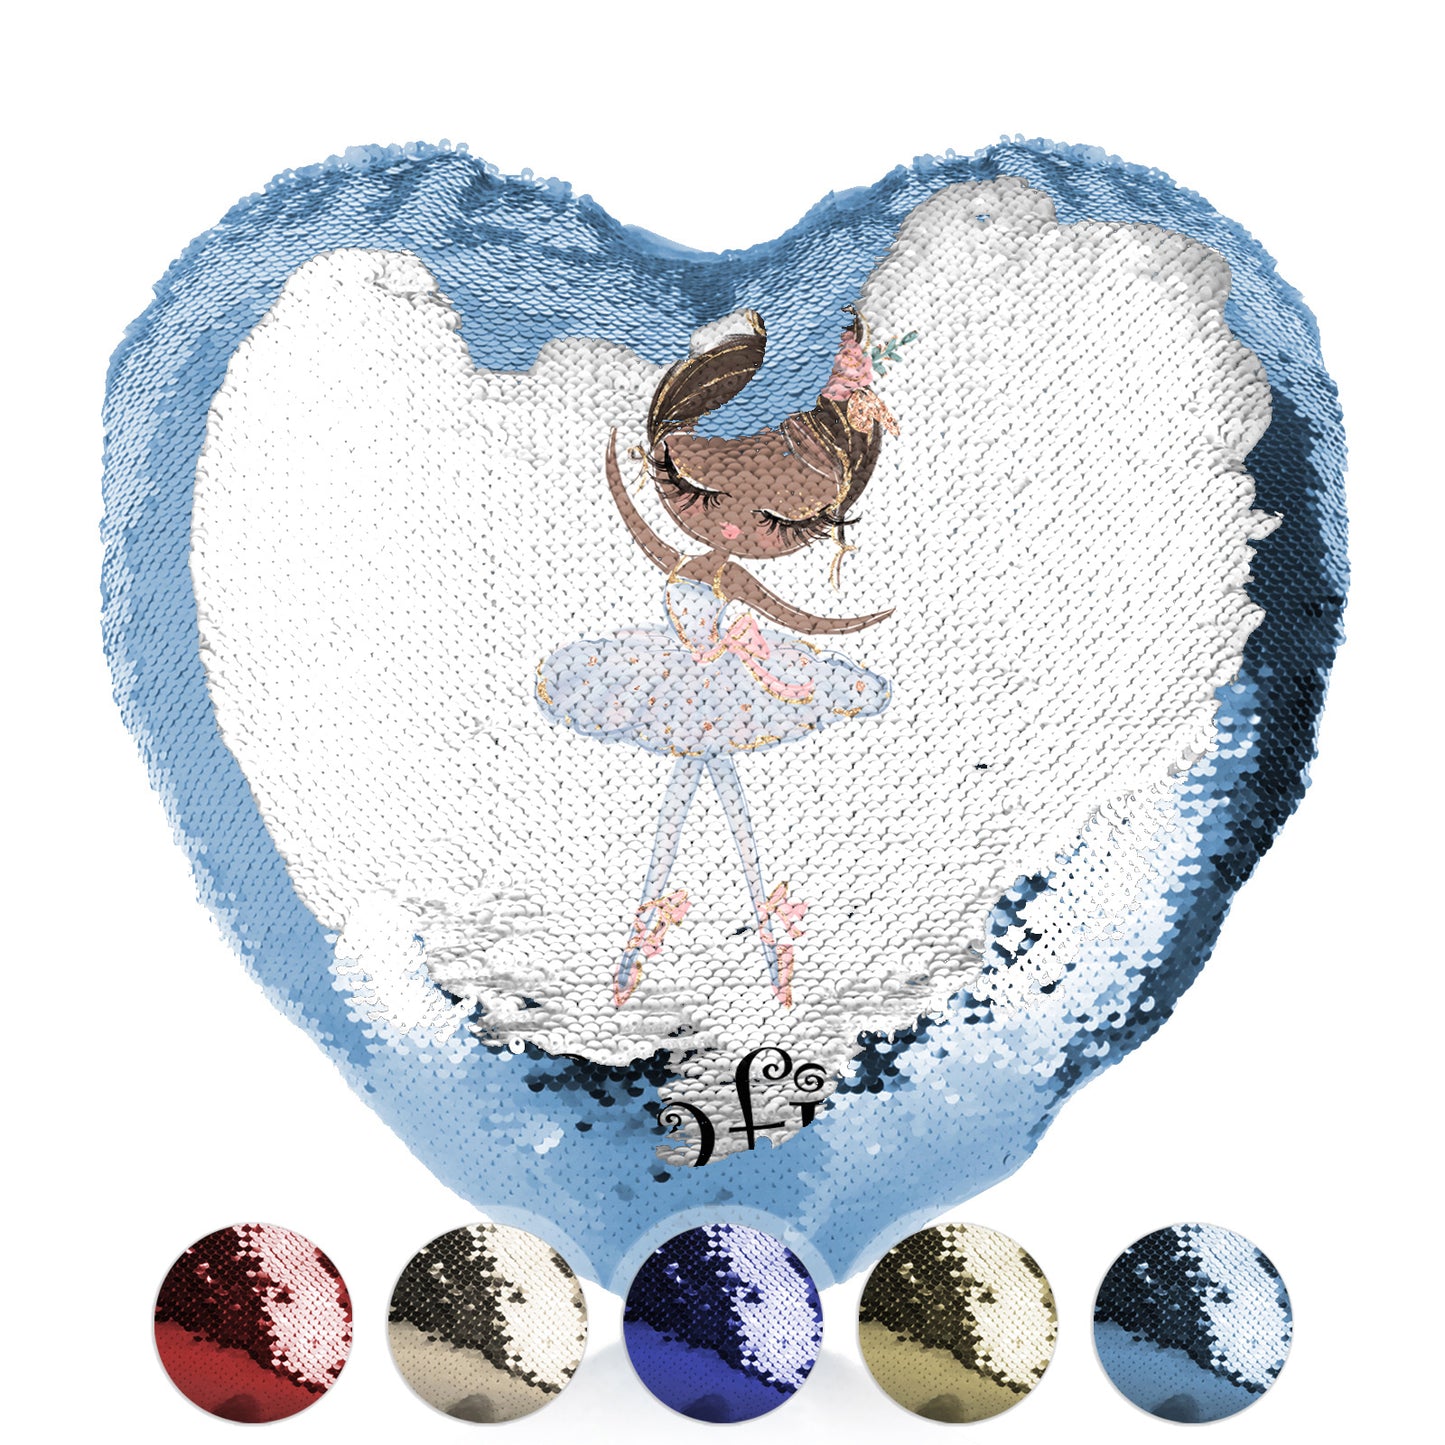 Personalised Sequin Heart Cushion with Cute Text and Black Hair White Dress Ballerina